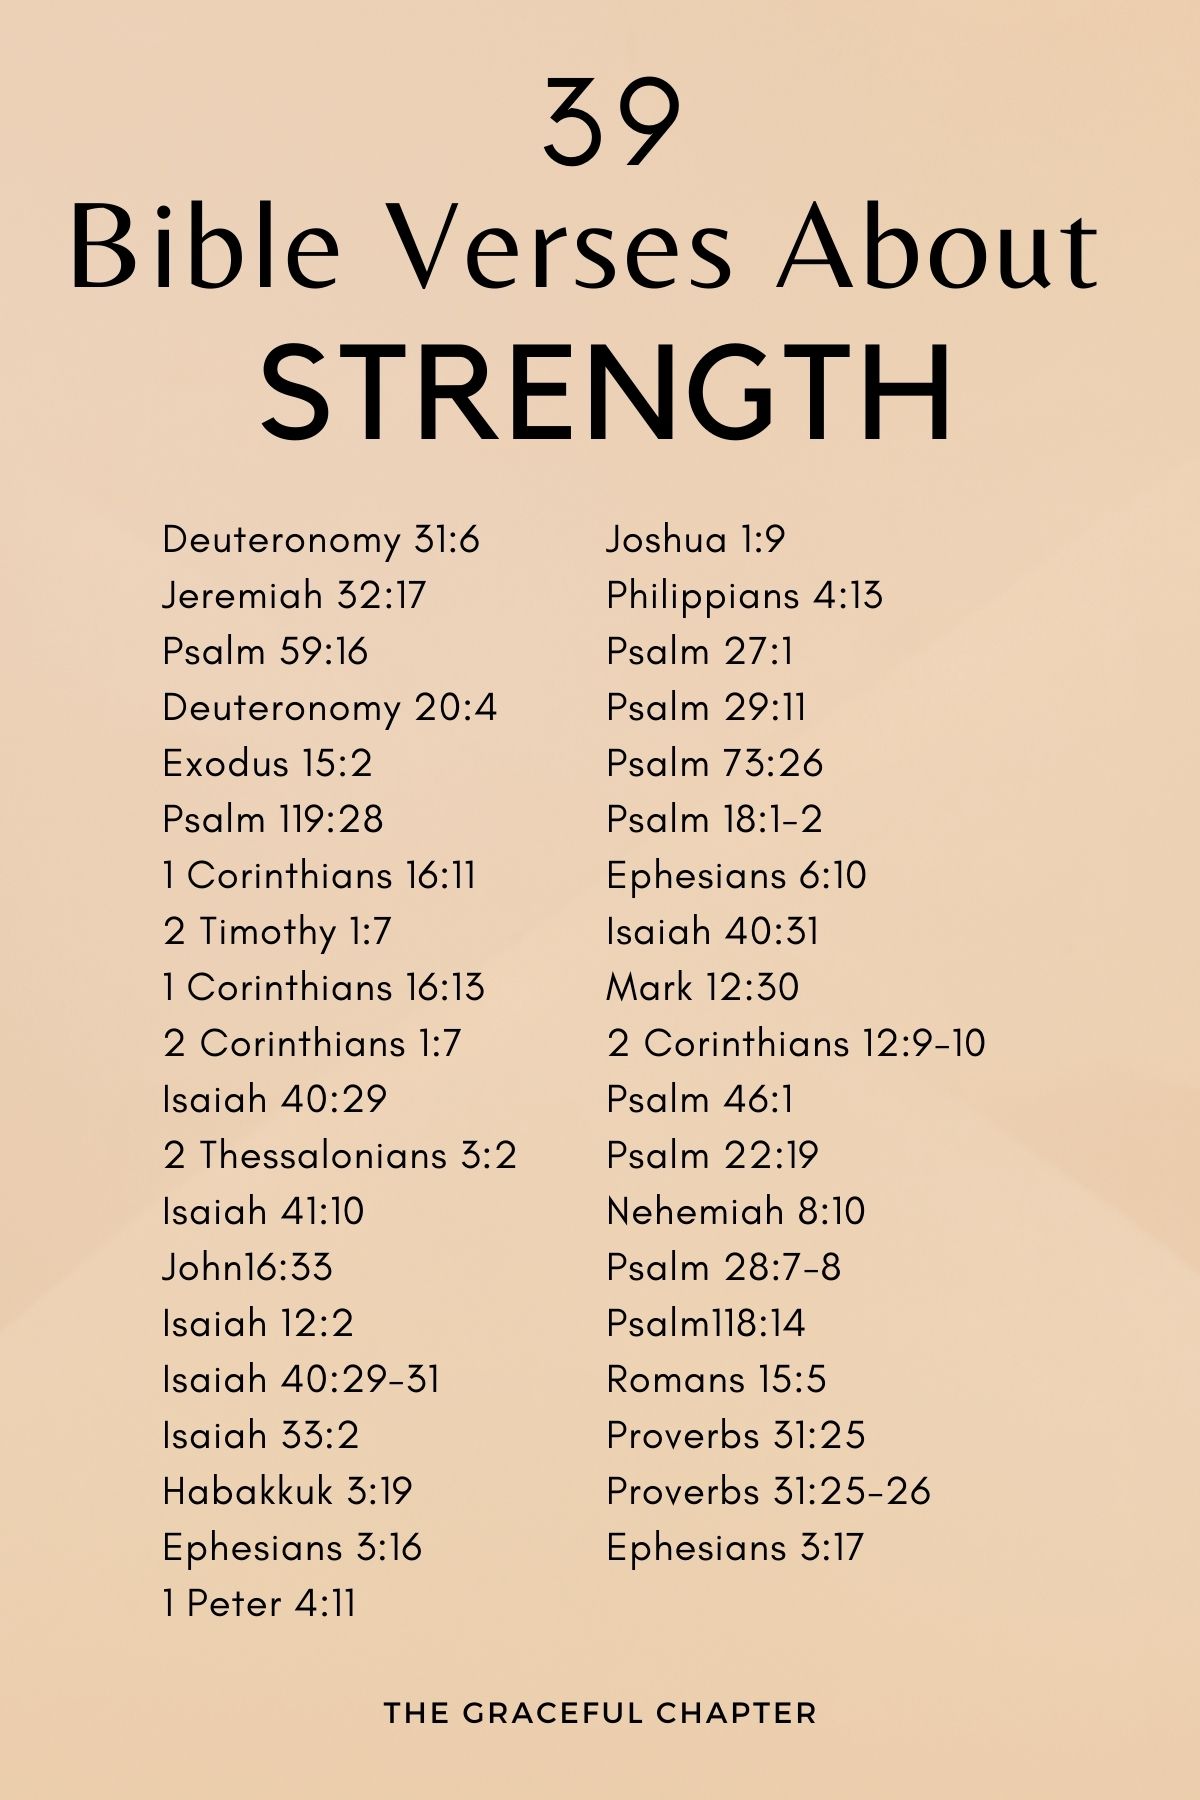 bible verses about strength